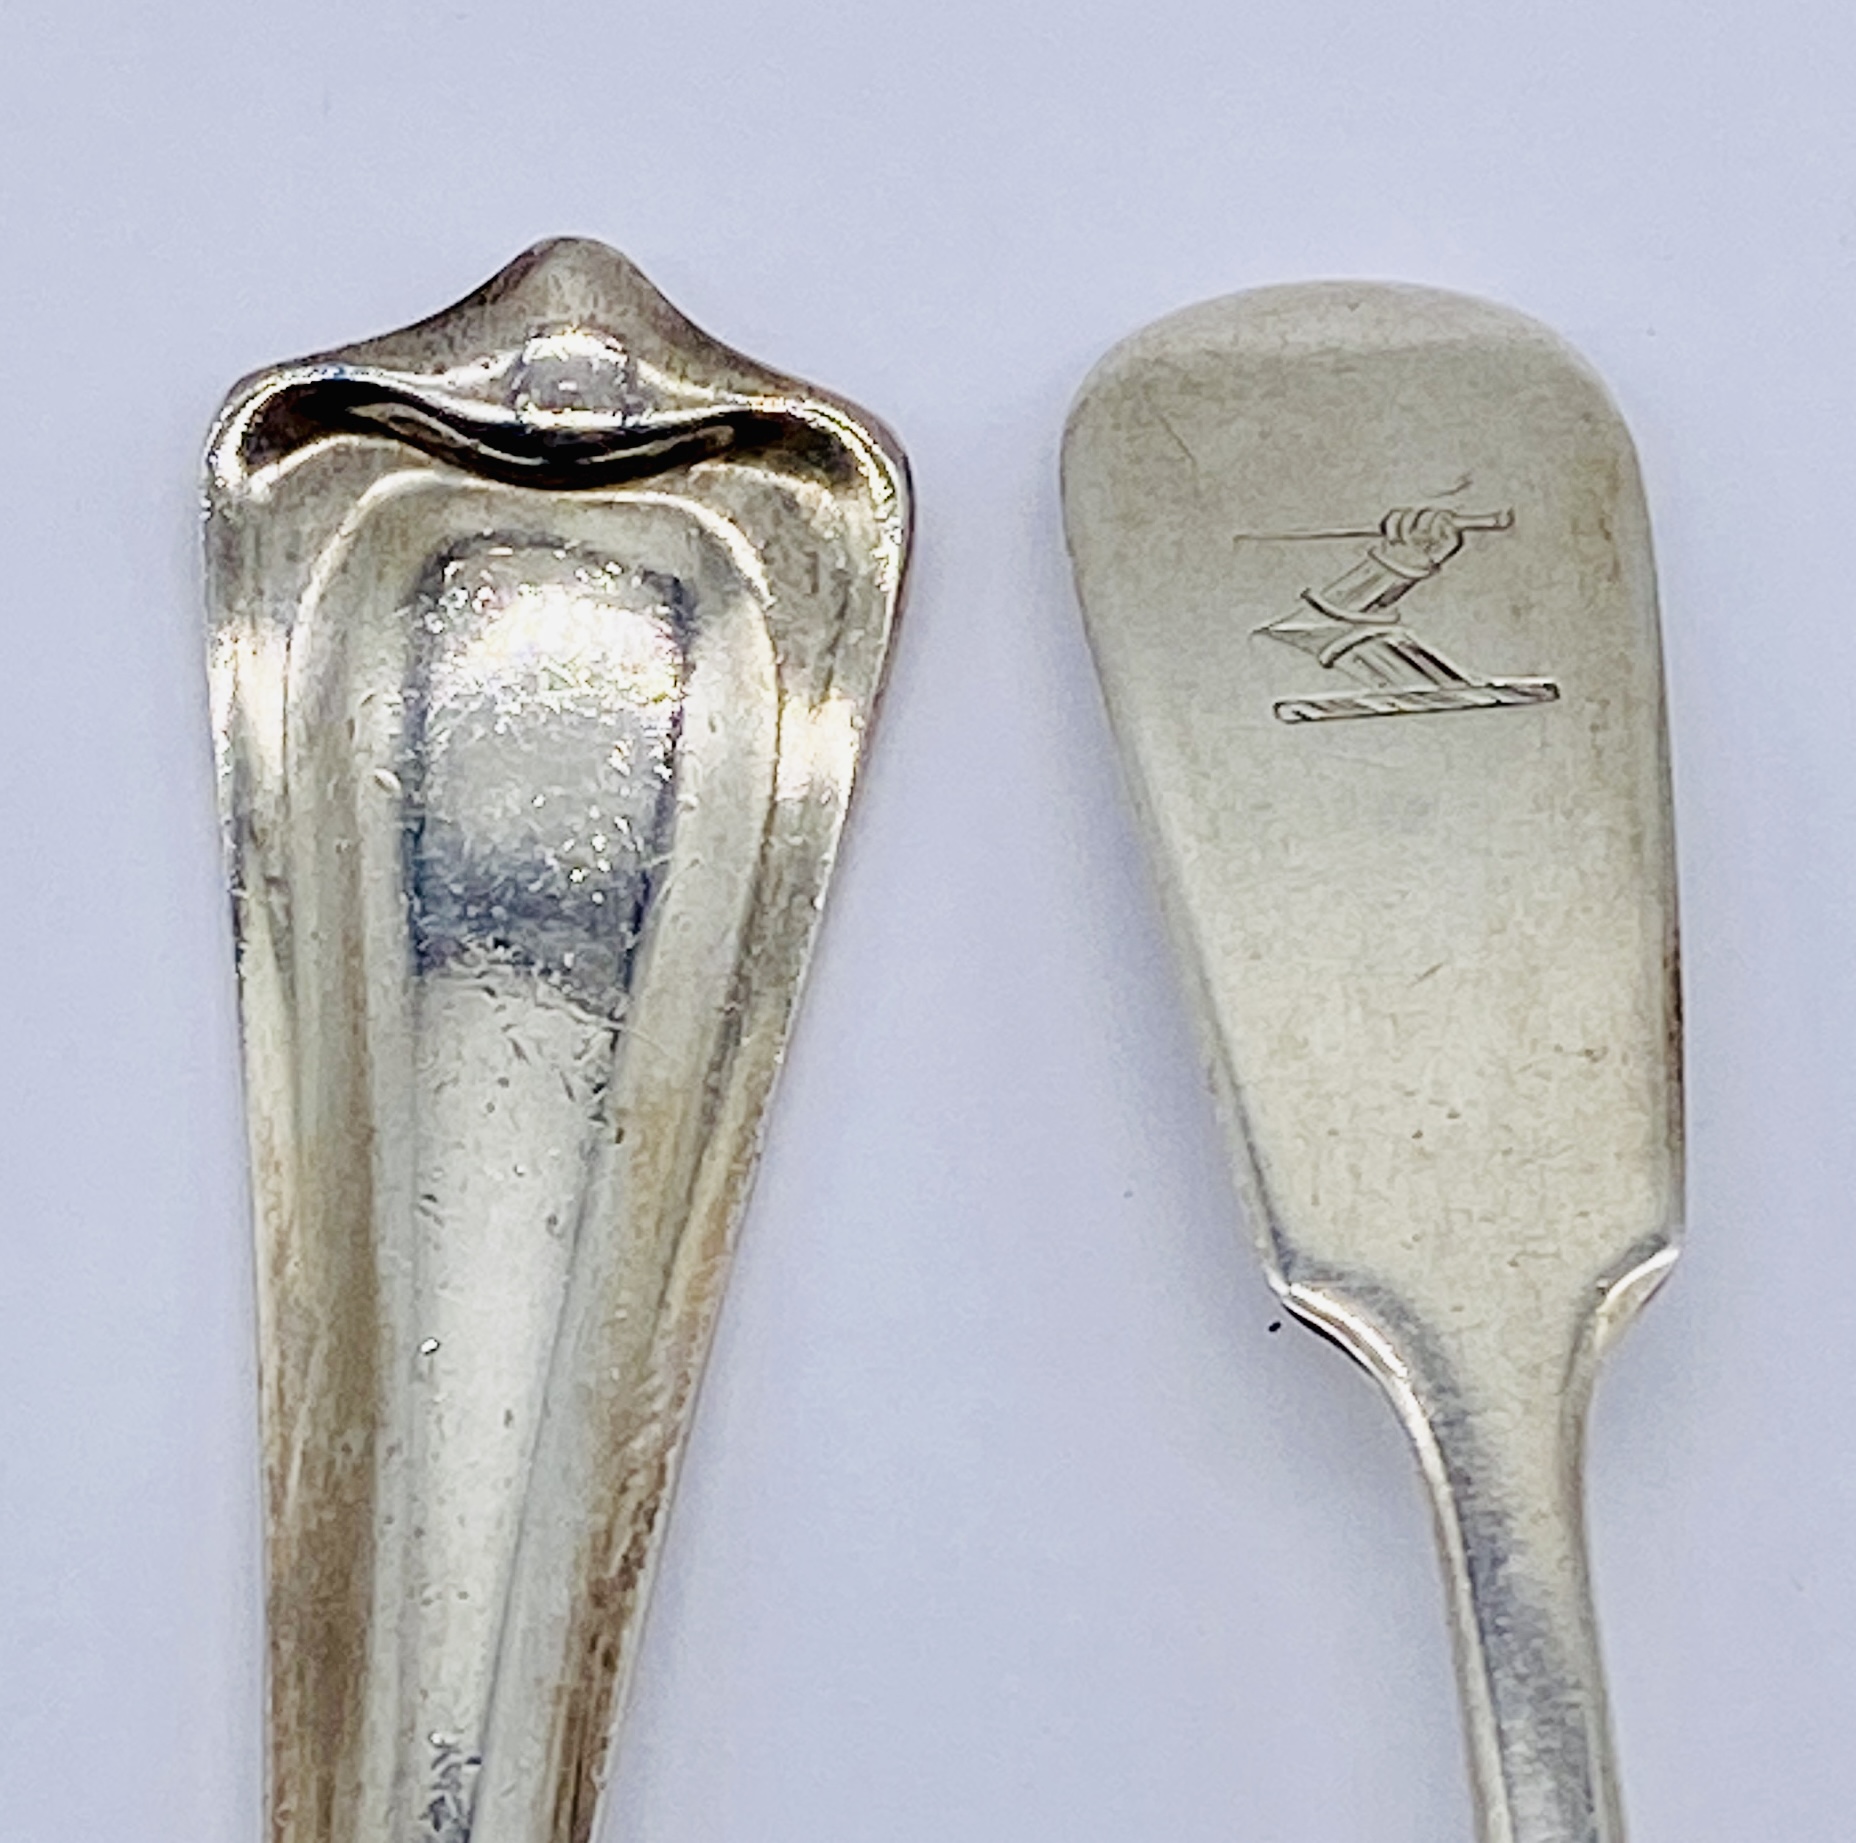 An Exeter silver stilton scoop dated 1851 by John Stone along with another silver stilton scoop by - Image 2 of 2